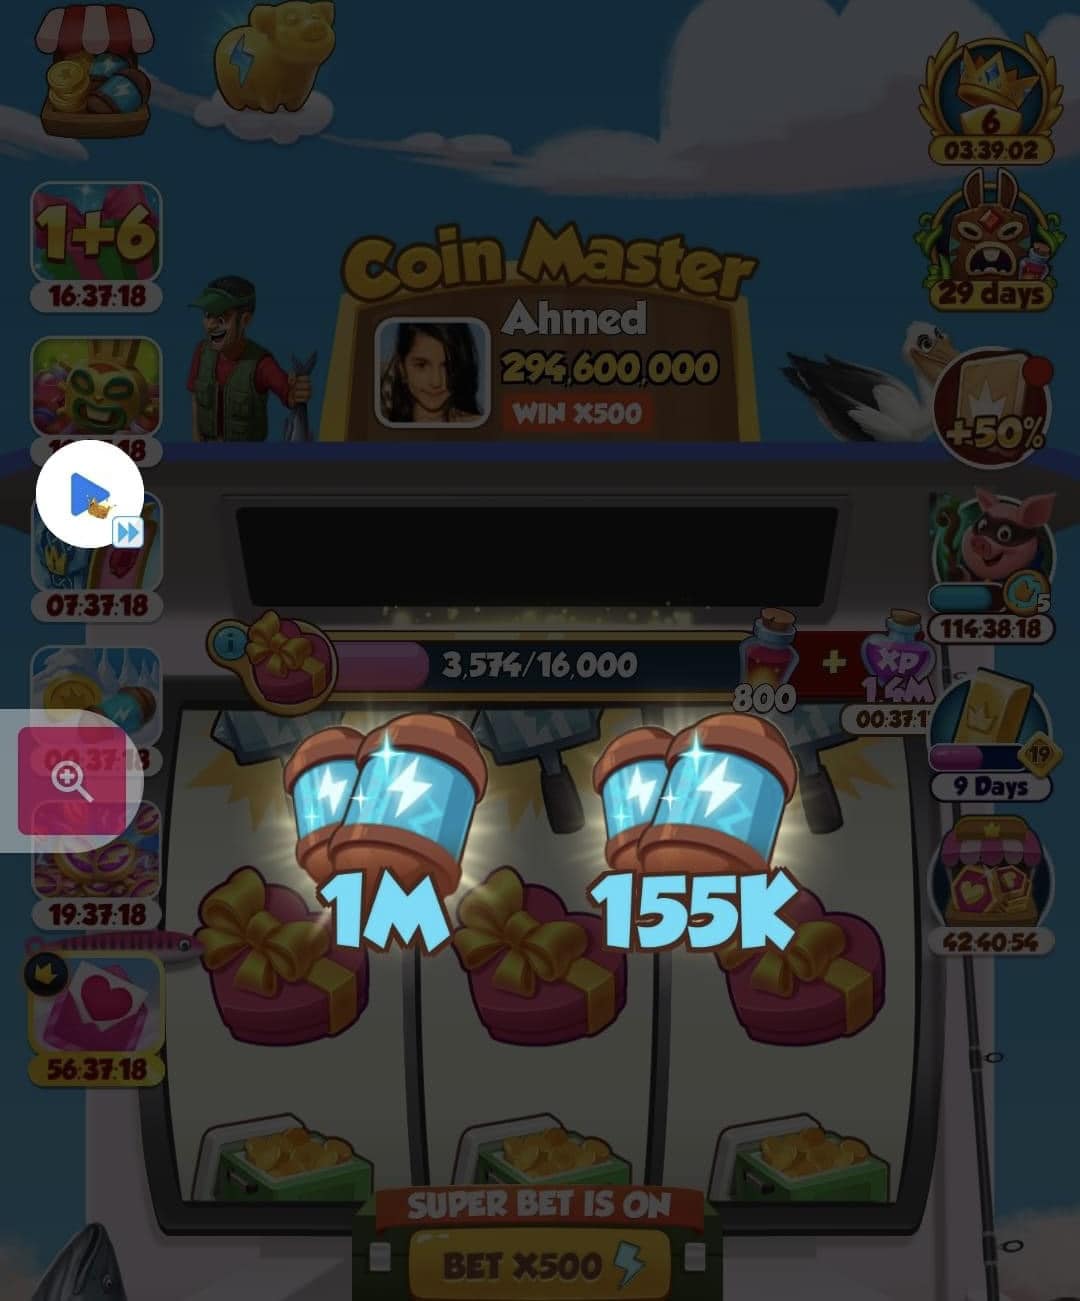 Coin Master 50 Free Spin Gratuit Today March 7